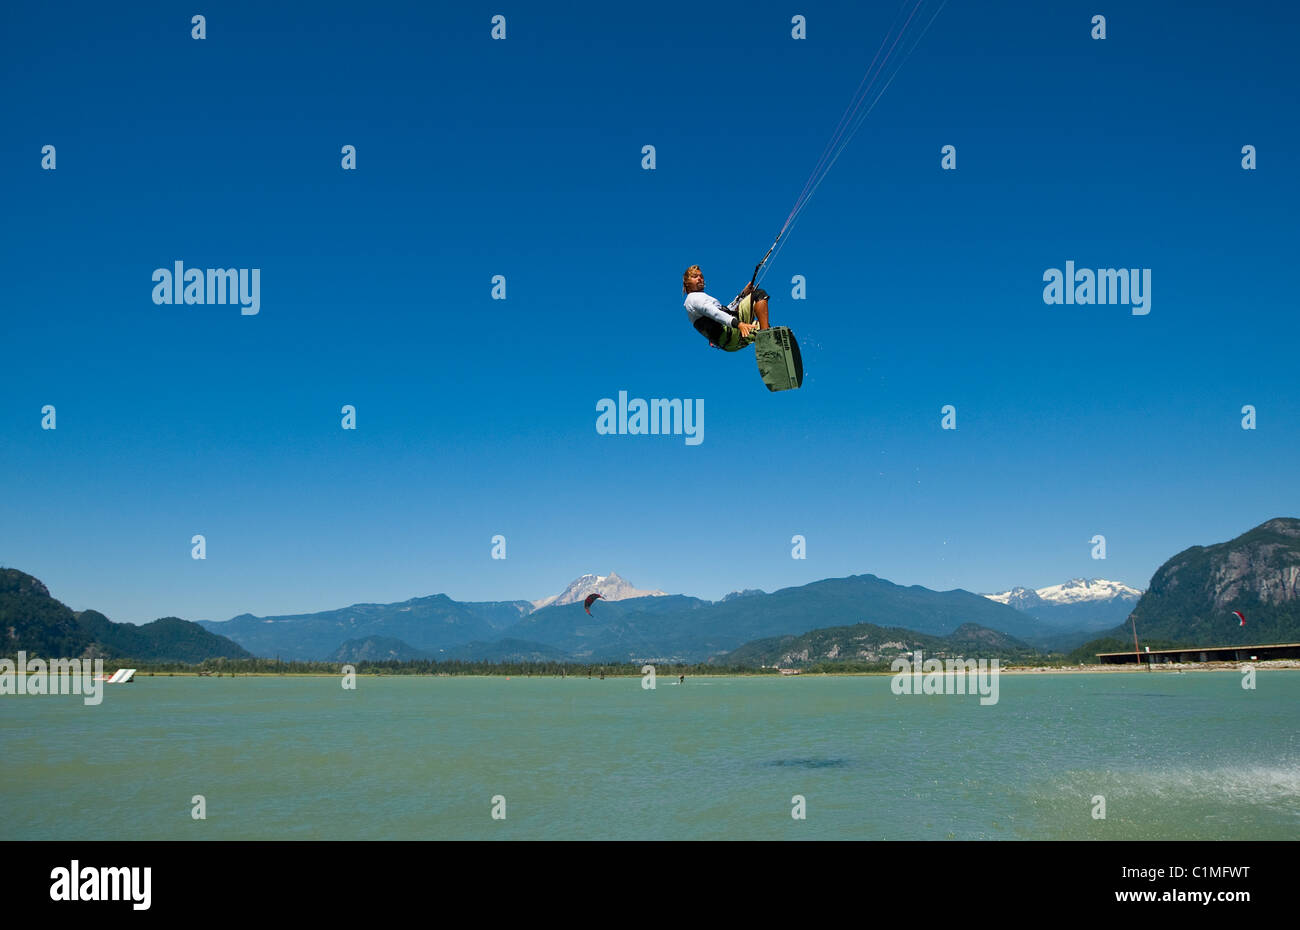 Airborne kiteboarder at 'the Spit', Squamish, BC, Canada. Stock Photo